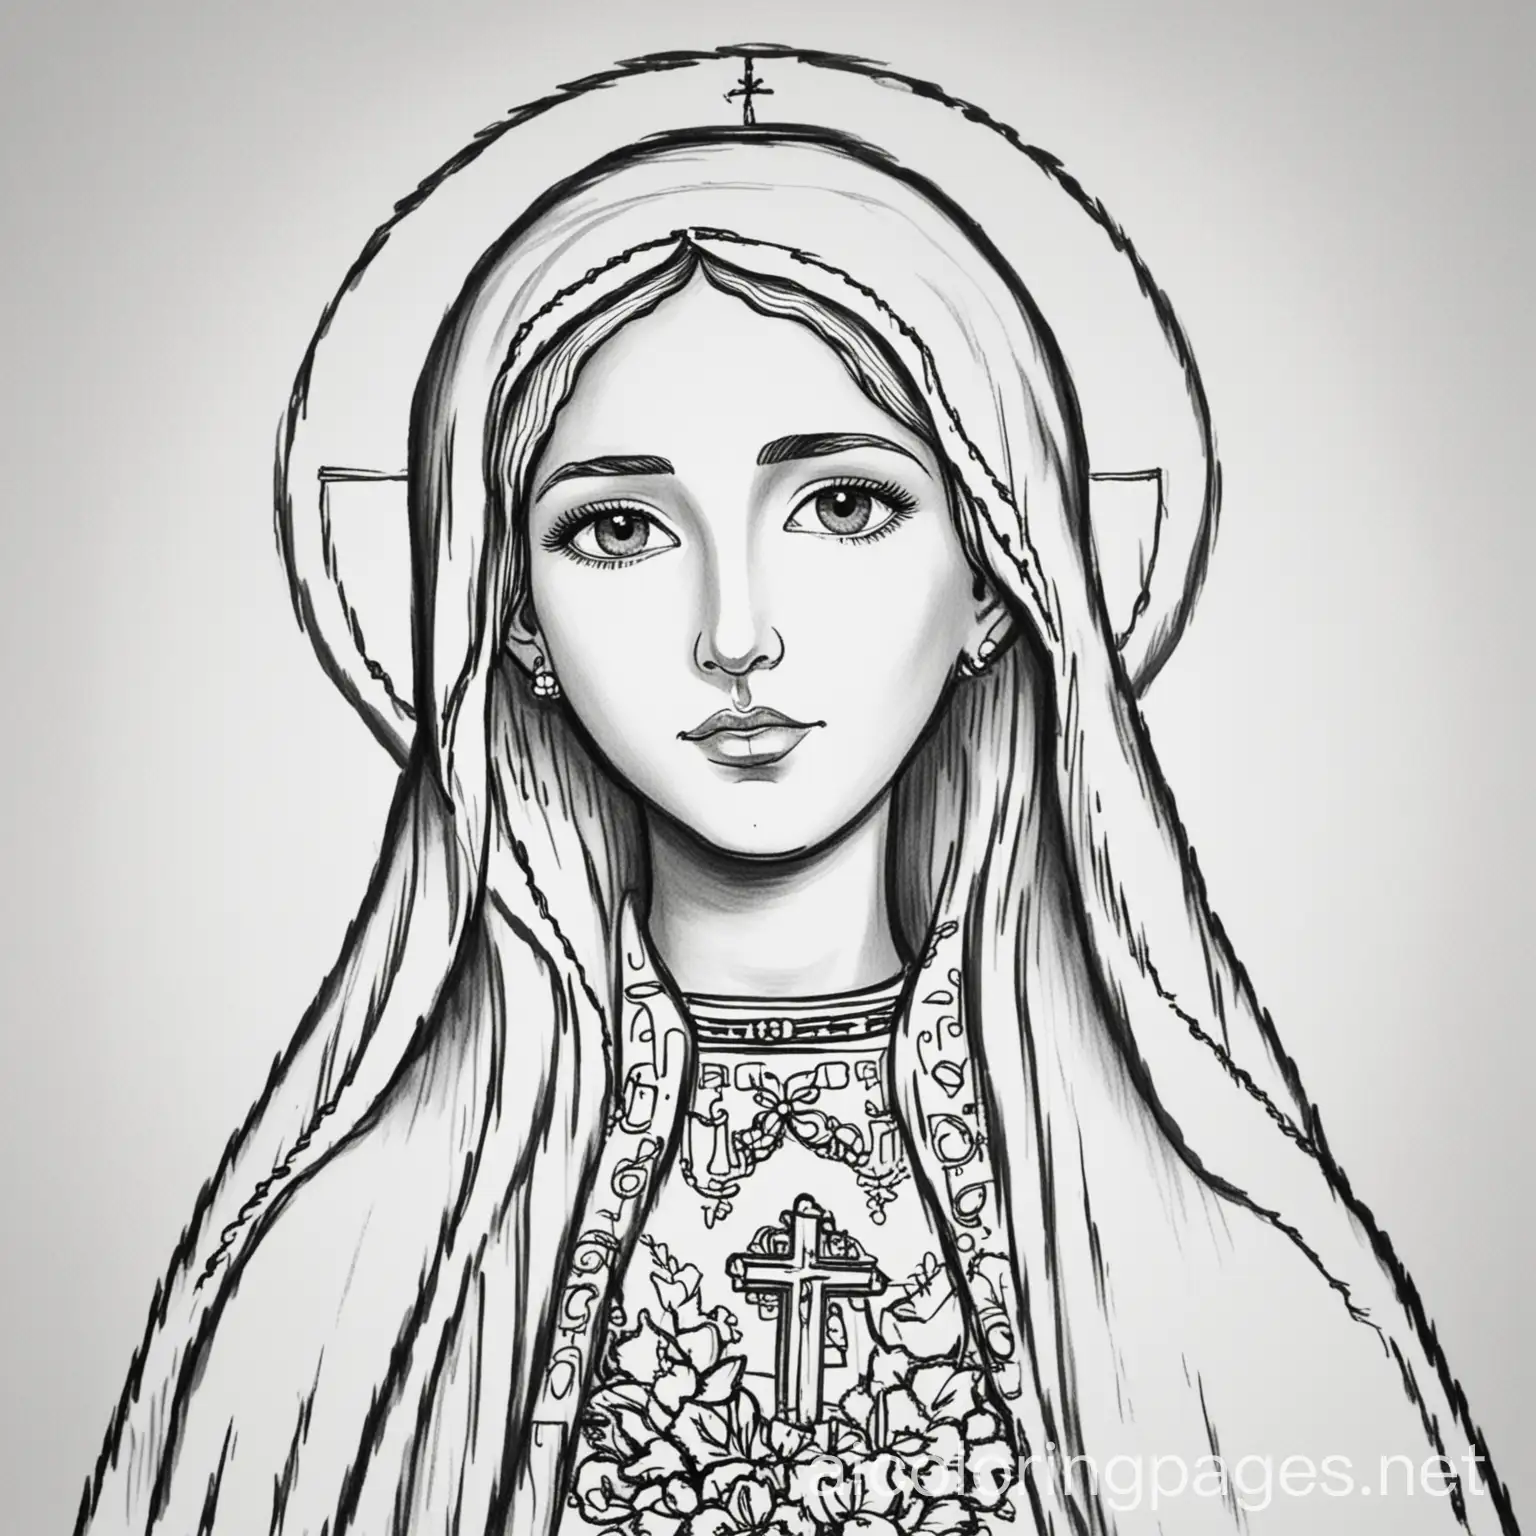 Our lady of fatima, Coloring Page, black and white, line art, white background, Simplicity, Ample White Space. The background of the coloring page is plain white to make it easy for young children to color within the lines. The outlines of all the subjects are easy to distinguish, making it simple for kids to color without too much difficulty